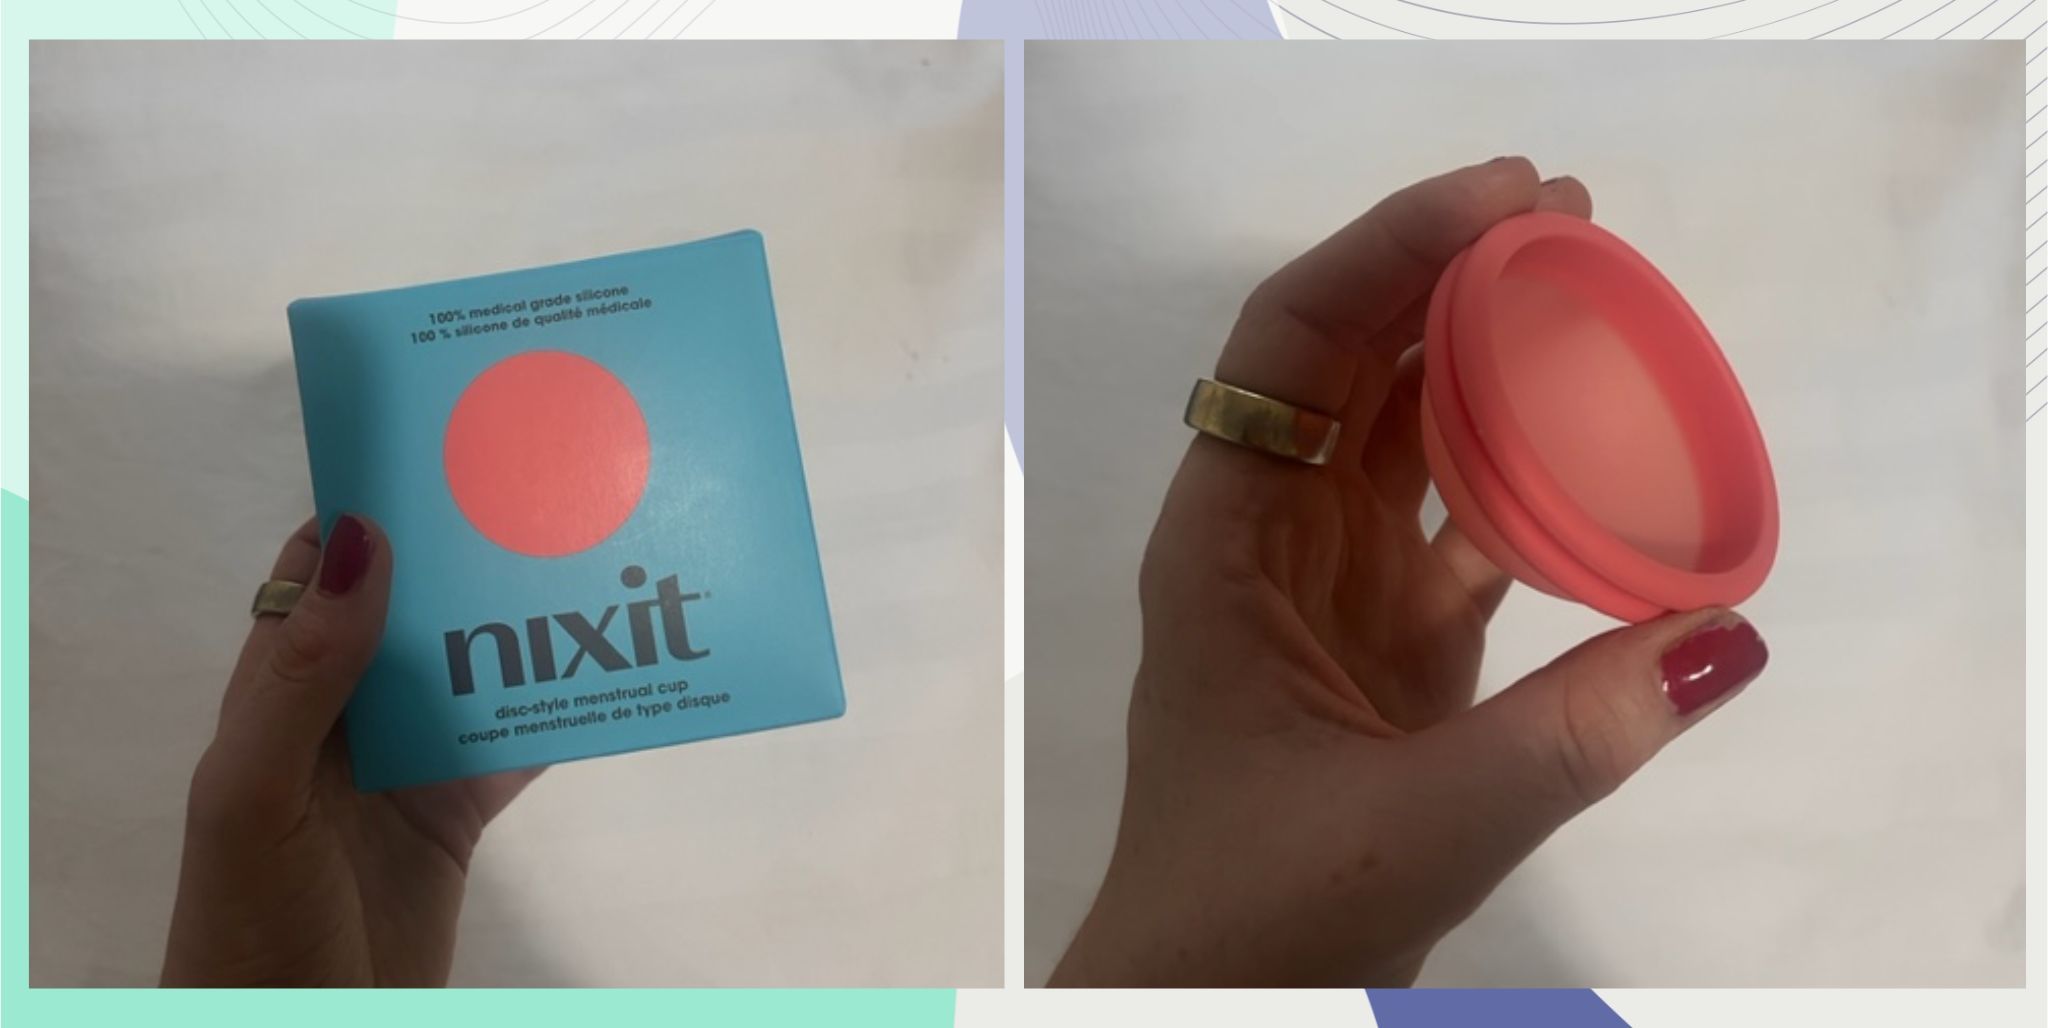 Nixit review: The disc-style menstrual cup that boasts 12 hours of